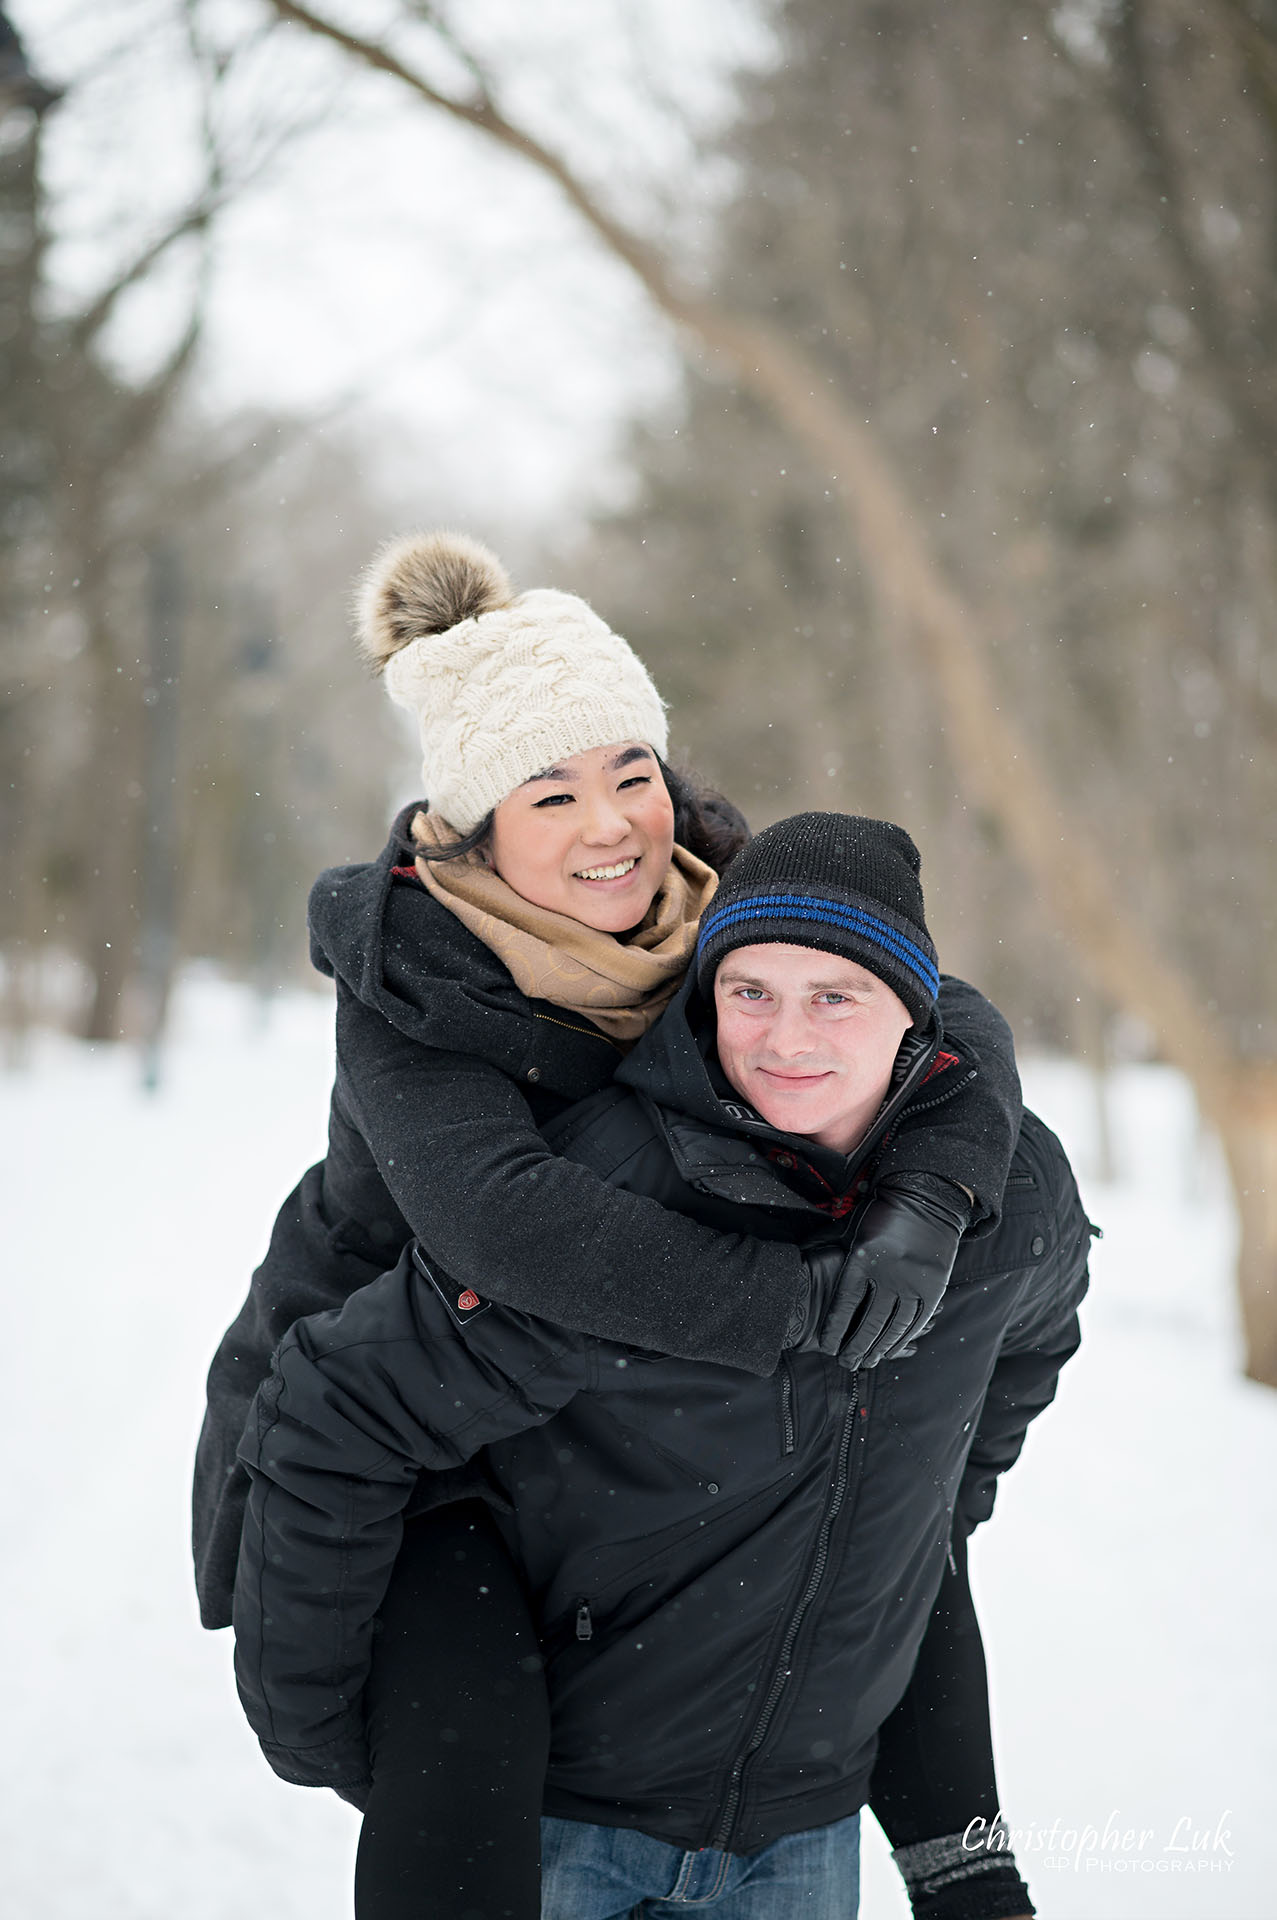 Christopher Luk Toronto Wedding Photographer Ice Skating Trail Winter Engagement Session Natural Photojournalistic Candid Bride Groom Portrait Colonel Samuel Smith Park Double Tree Lined Walking Path Pathway Walkway Landscape Piggyback Carrying Cute Fun Smile